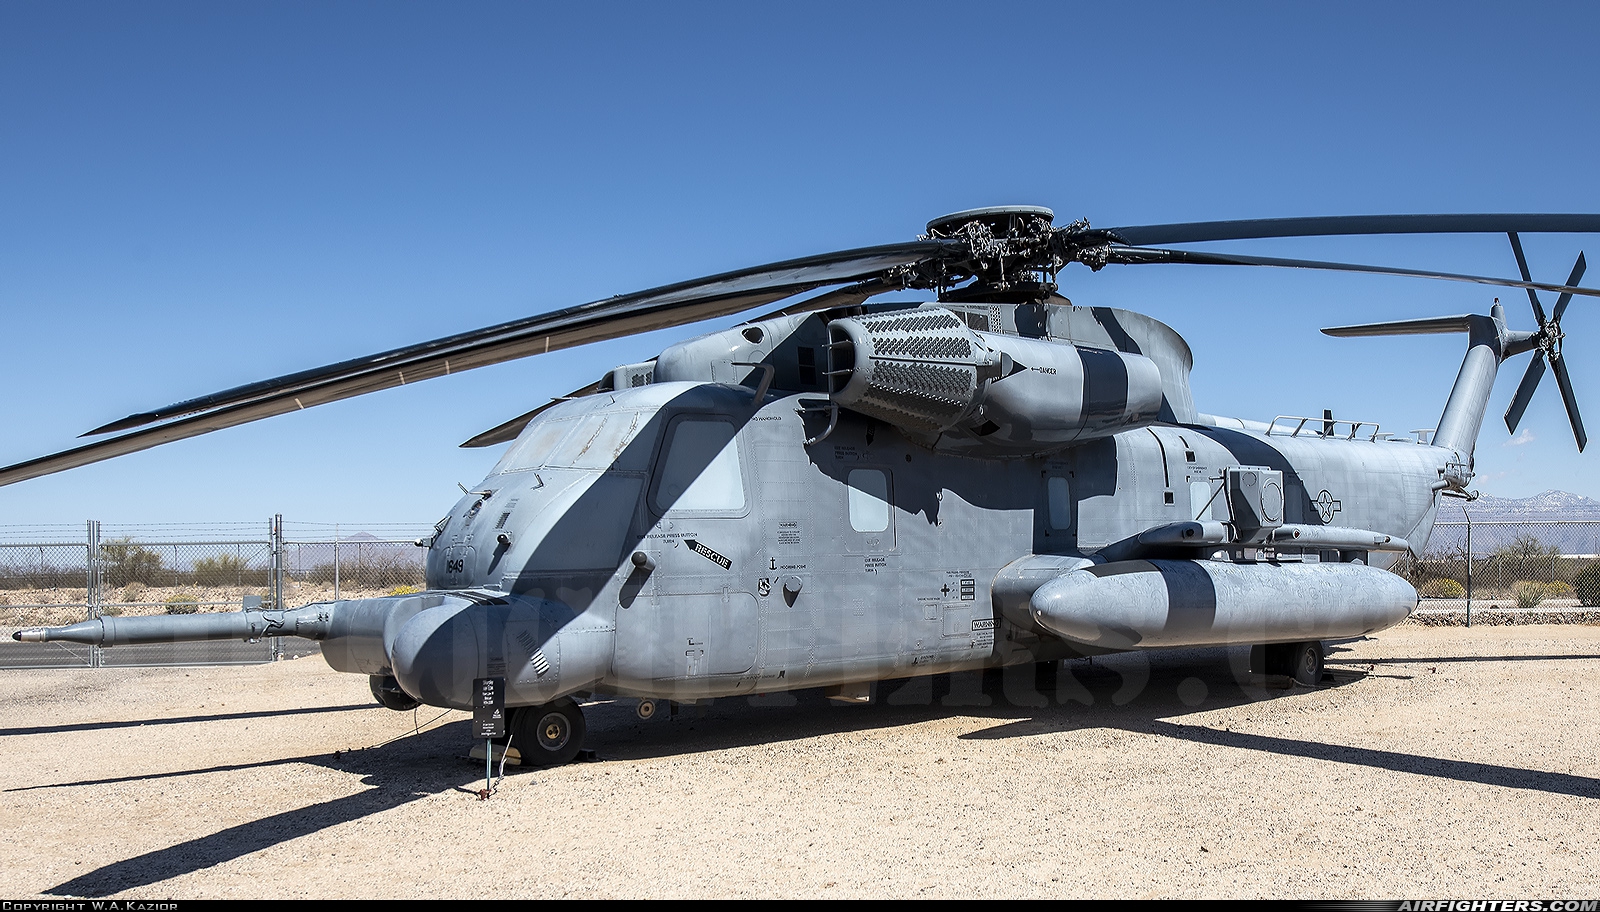 USA - Air Force Sikorsky MH-53M Pave Low IV (S-65) 73-1649 at Tucson - Pima Air and Space Museum, USA